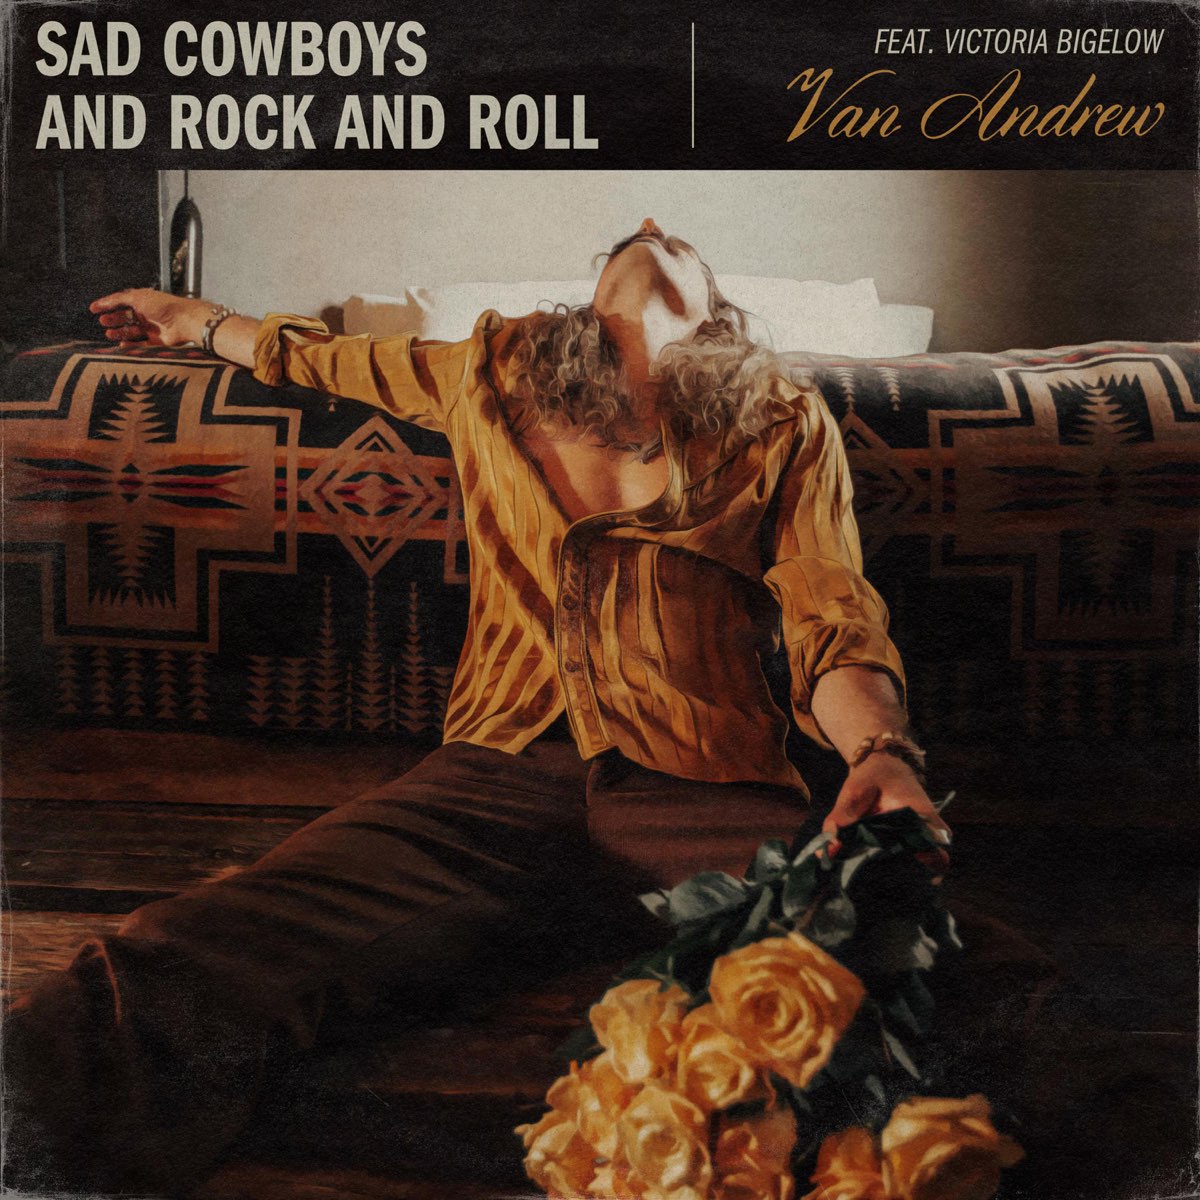 Van Andrew featuring Victoria Bigelow — Sad Cowboys and Rock and Roll cover artwork